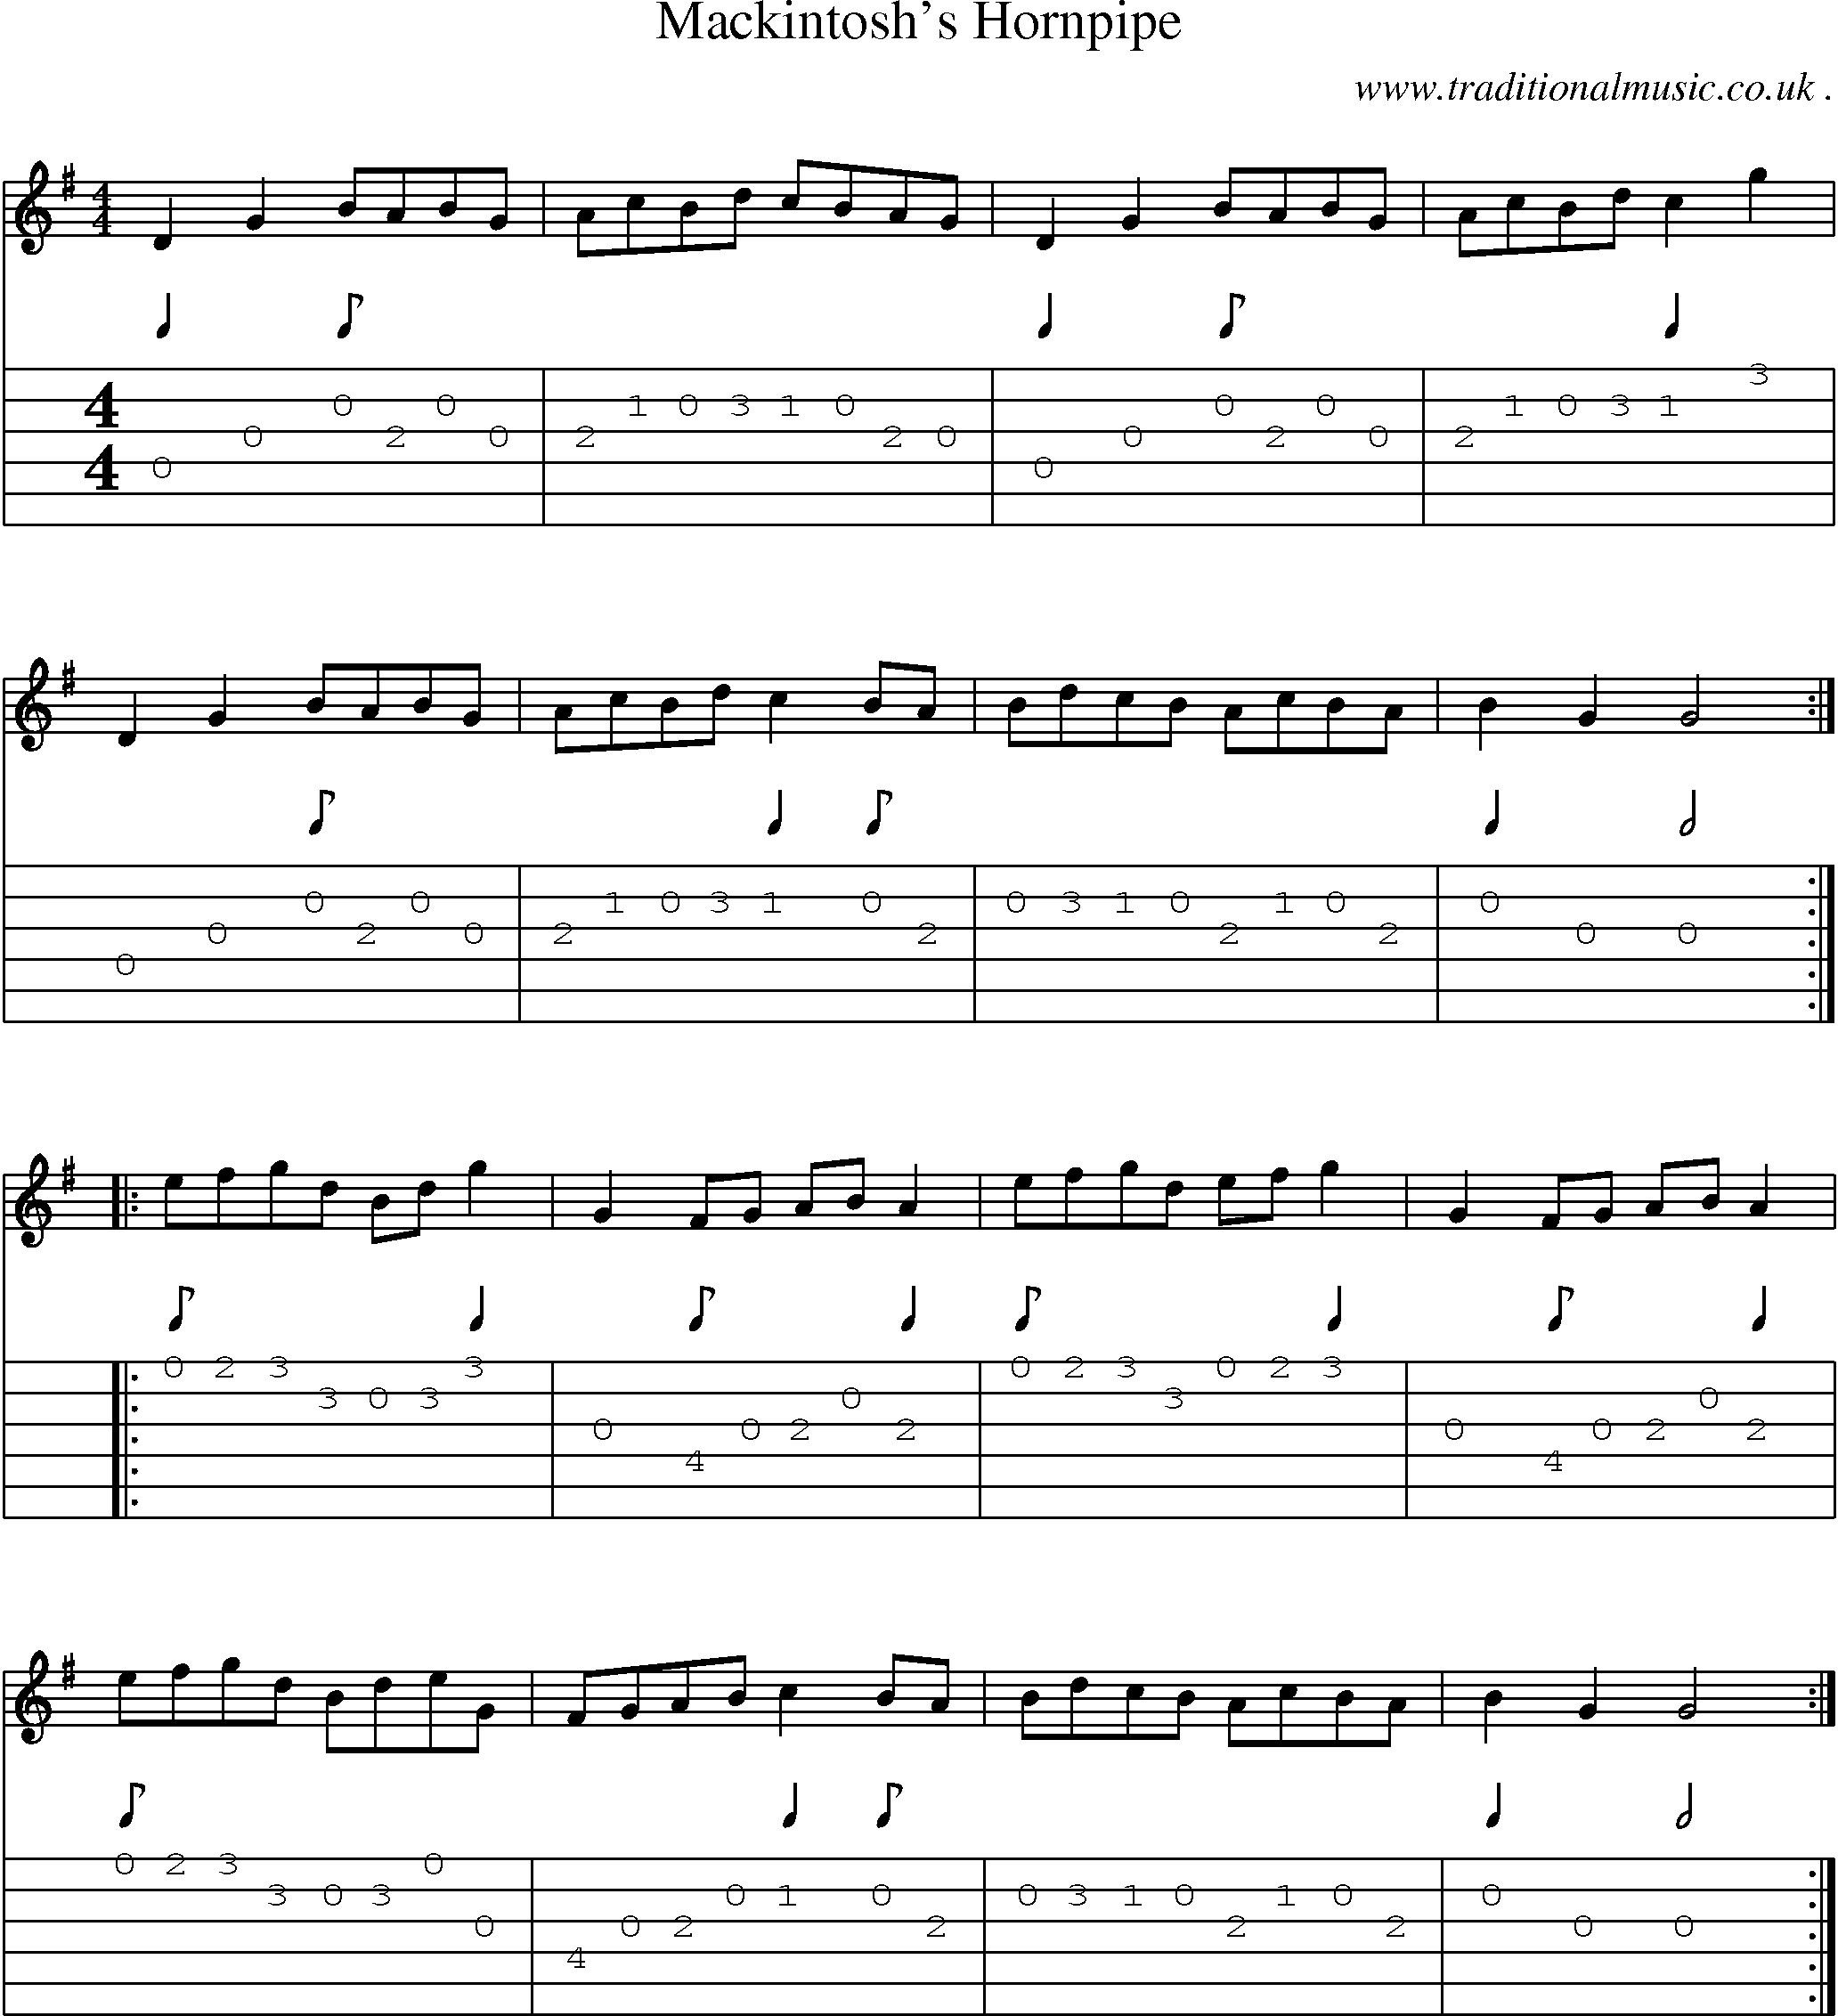 Sheet-Music and Guitar Tabs for Mackintoshs Hornpipe